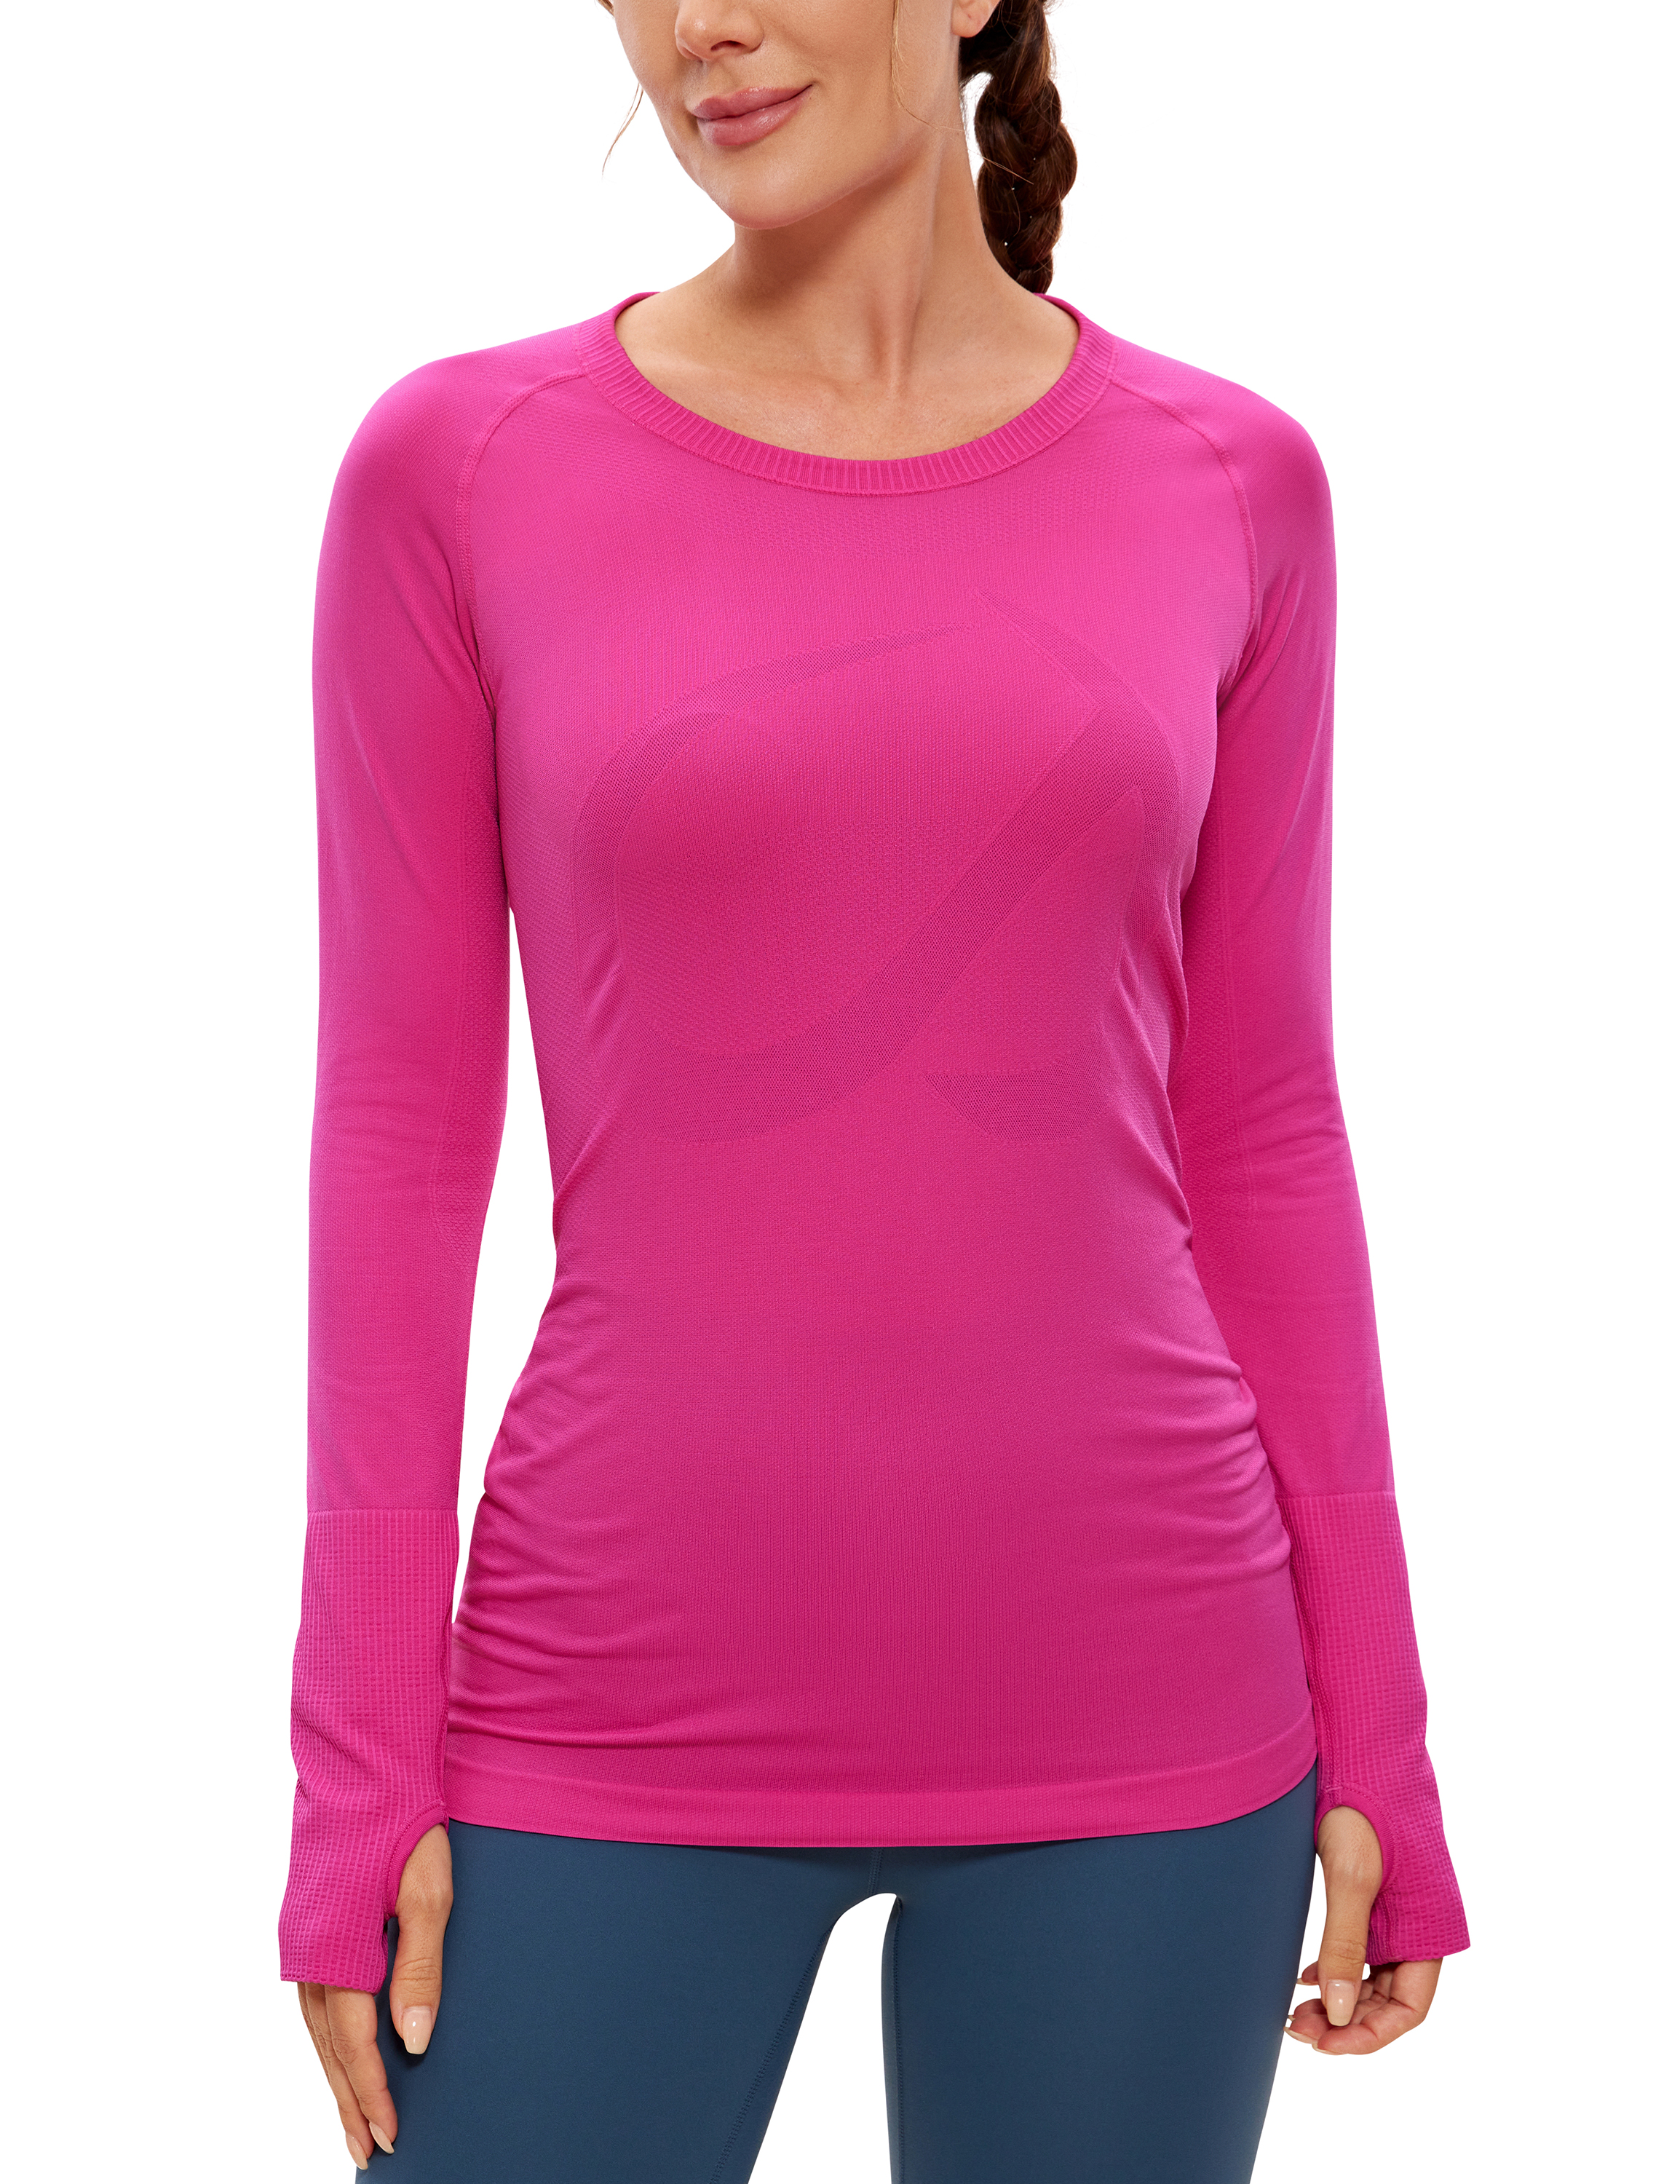 CRZ YOGA Women's Seamless Athletic Long Sleeves Sports Running